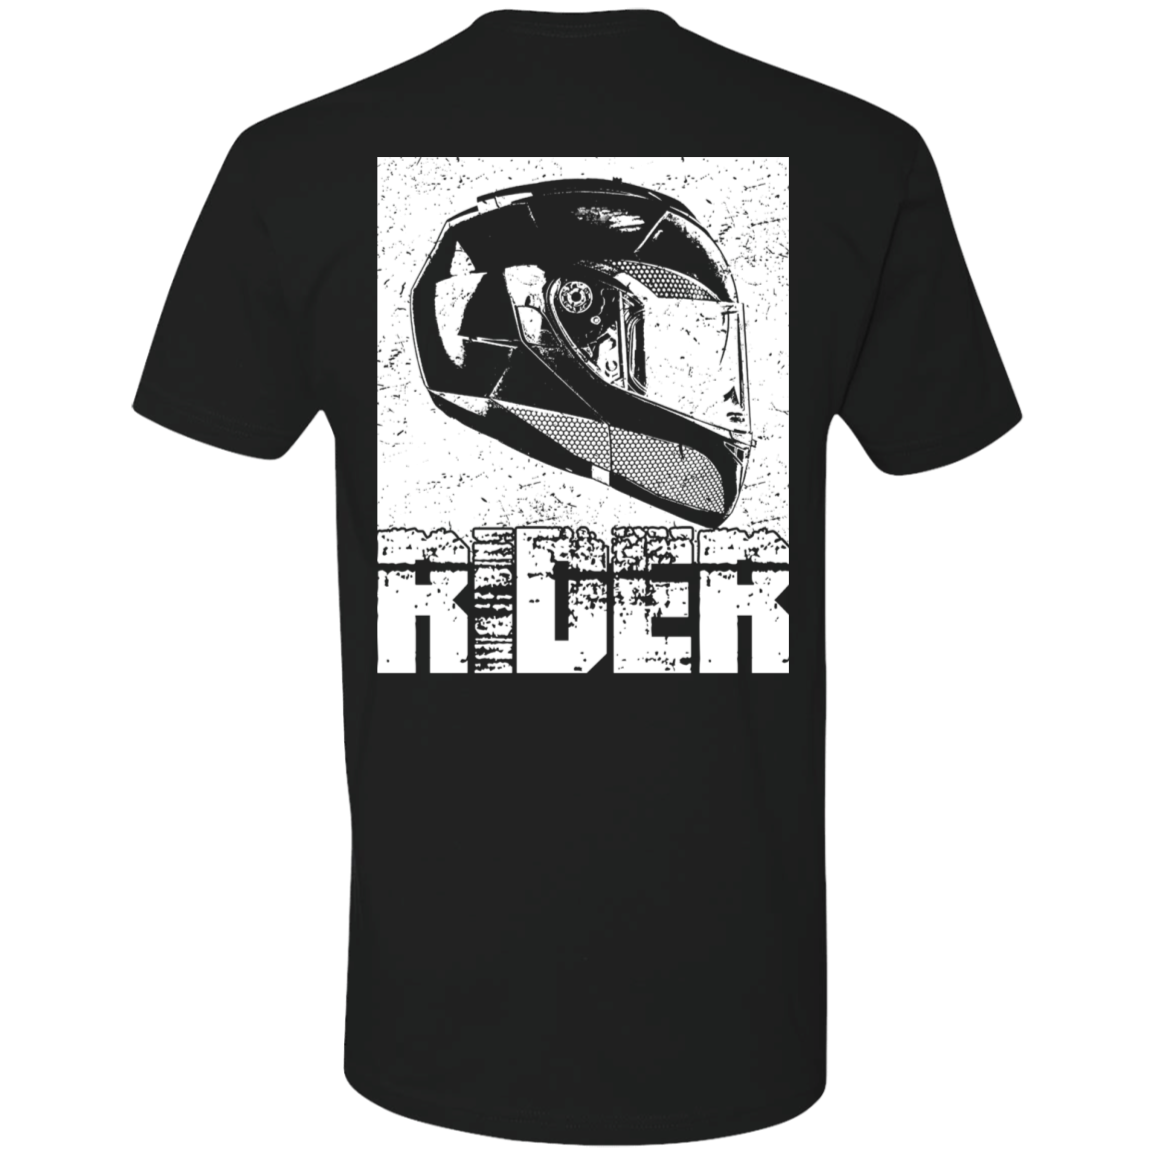 Unisex Motorcycle T-Shirt - Riders of the future